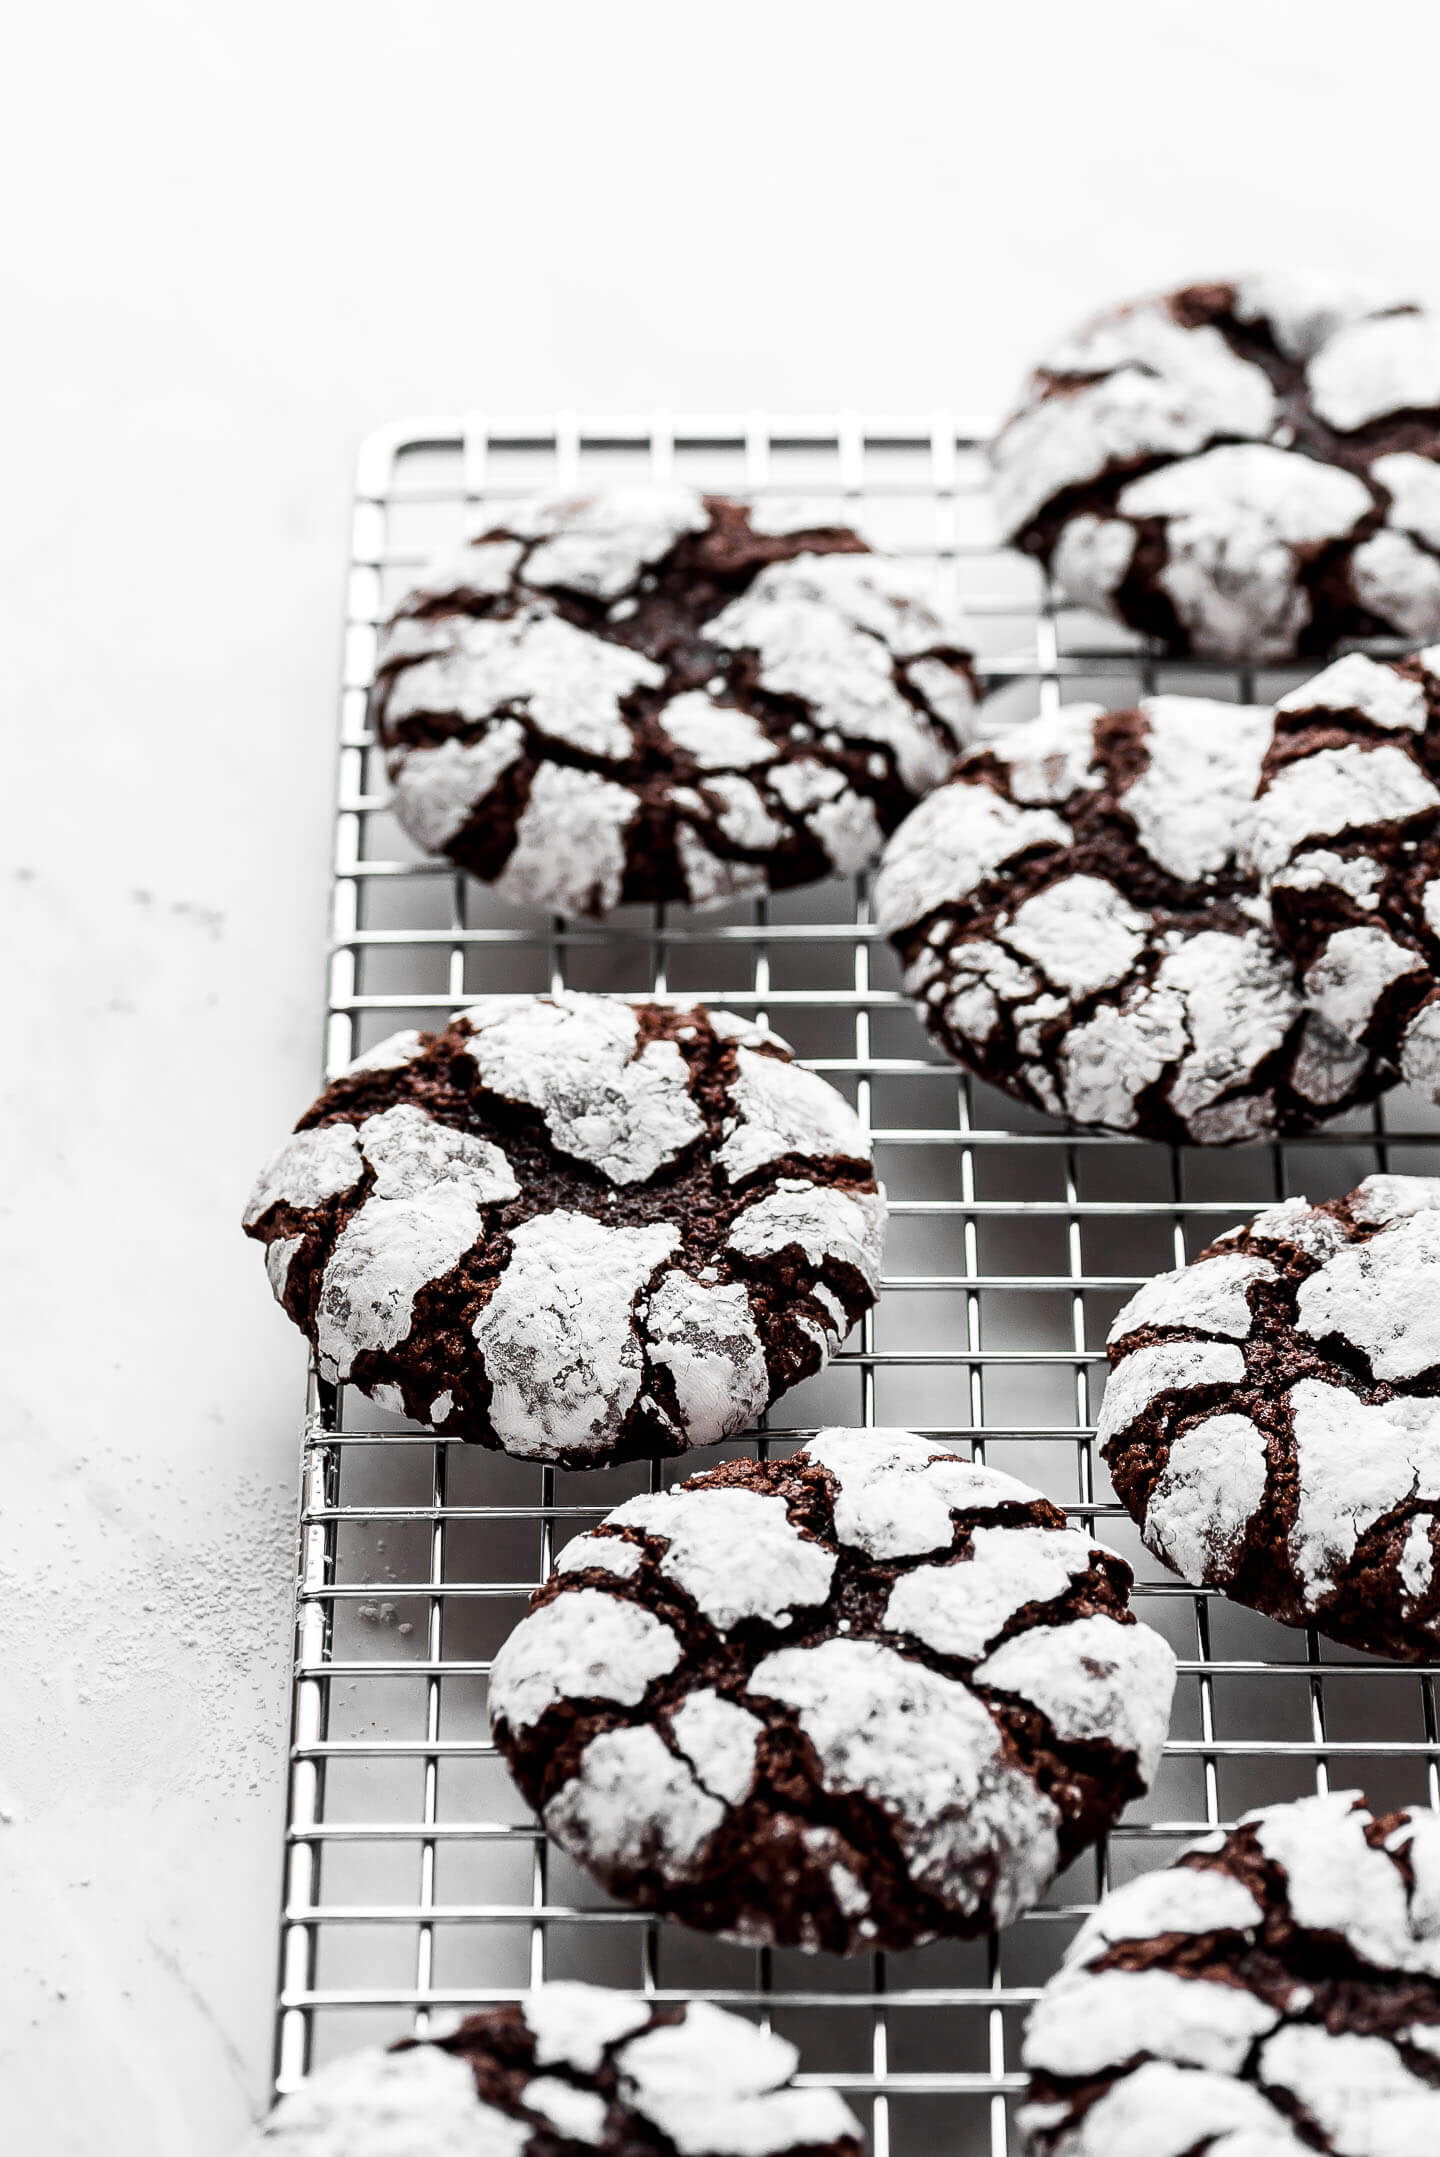 Chocolate cookies covered in powdered sugar.